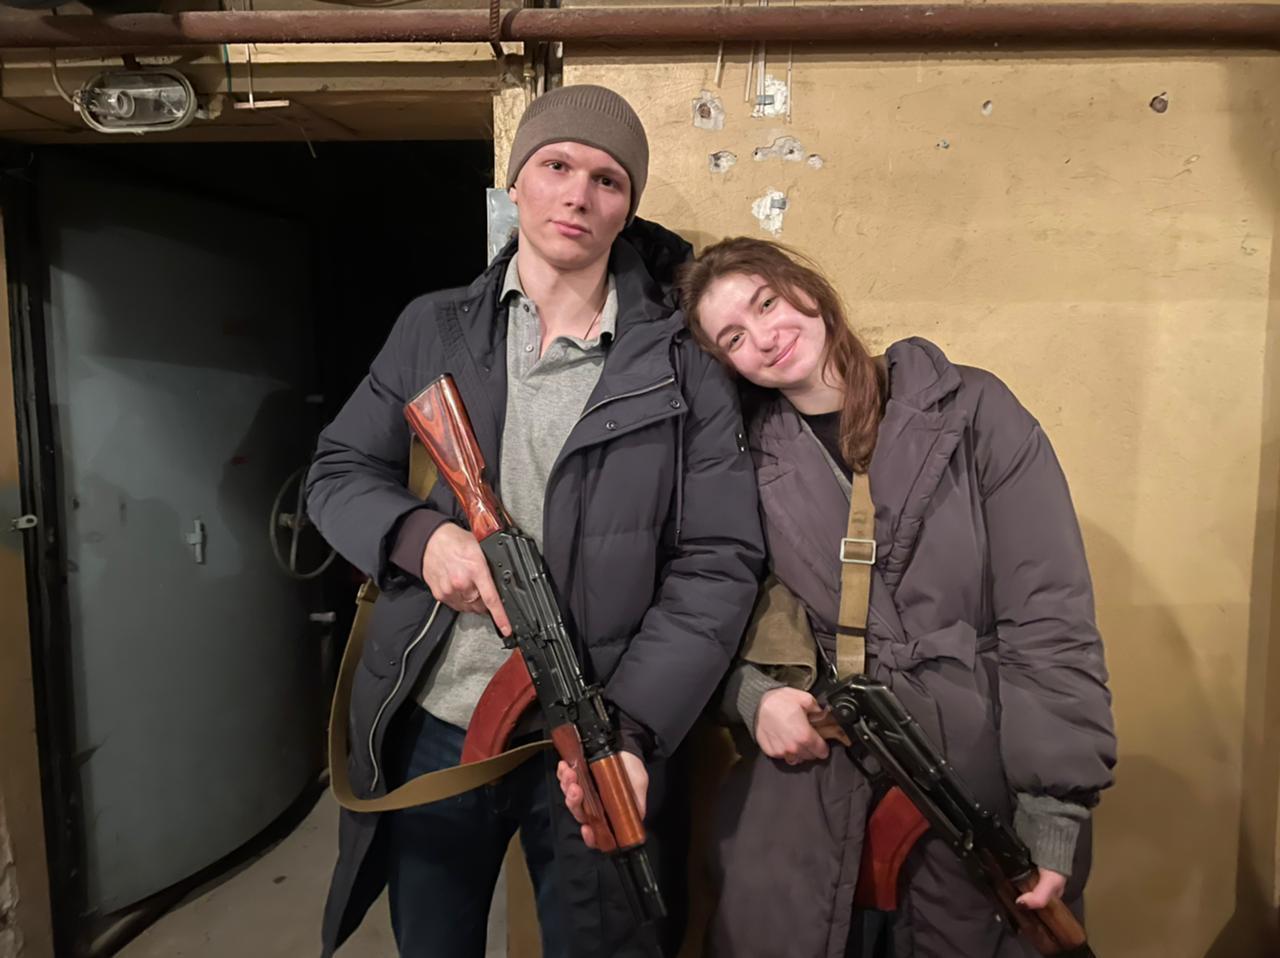 Yaryna Arieva and Sviatoslav Fursin spent their first day of marriage collecting their rifles to defend Ukraine.